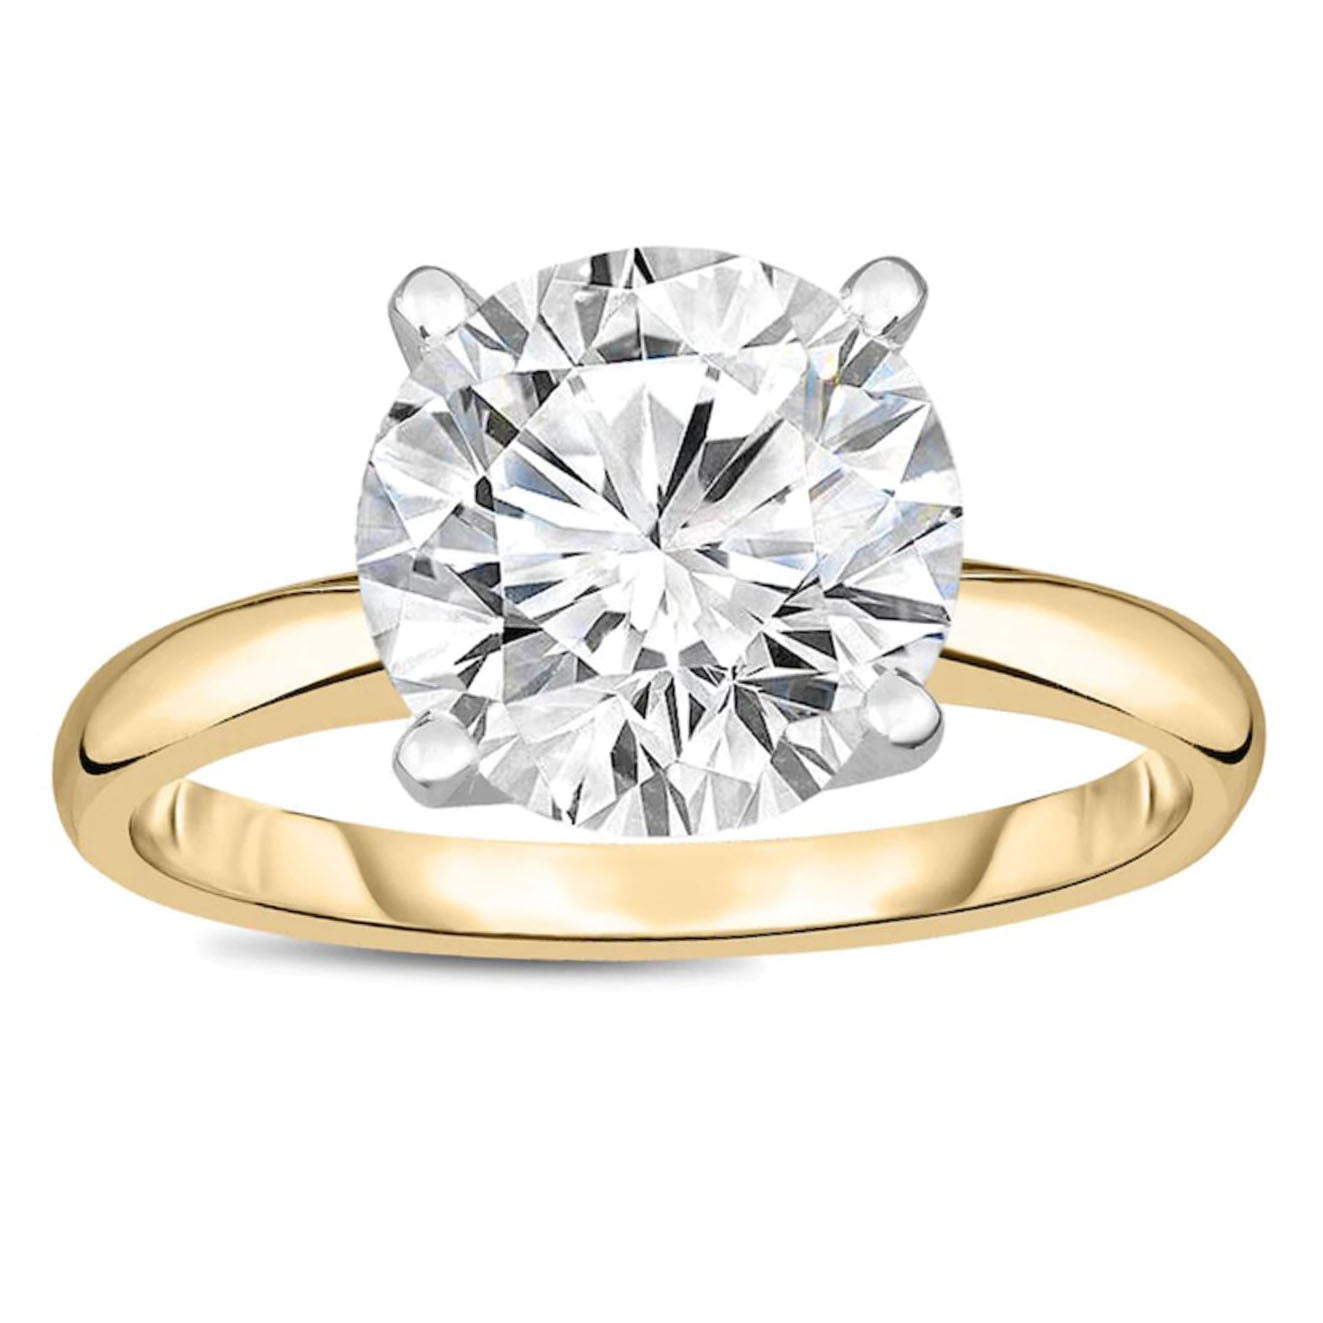 Amore Engagement Ring Women 3 Ct Moissanite Gold Sterling Ginger Lyne Collection - 3CT Gold over Silver,10